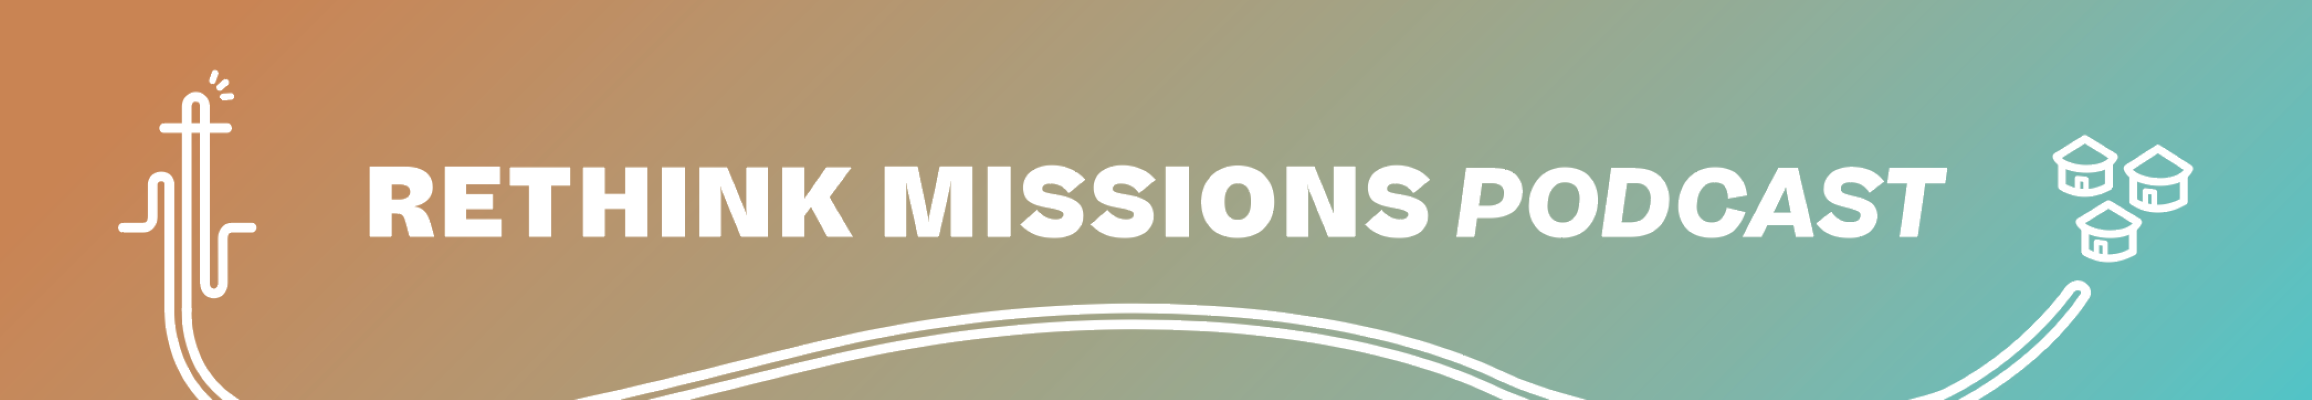 Rethink Missions Podcast